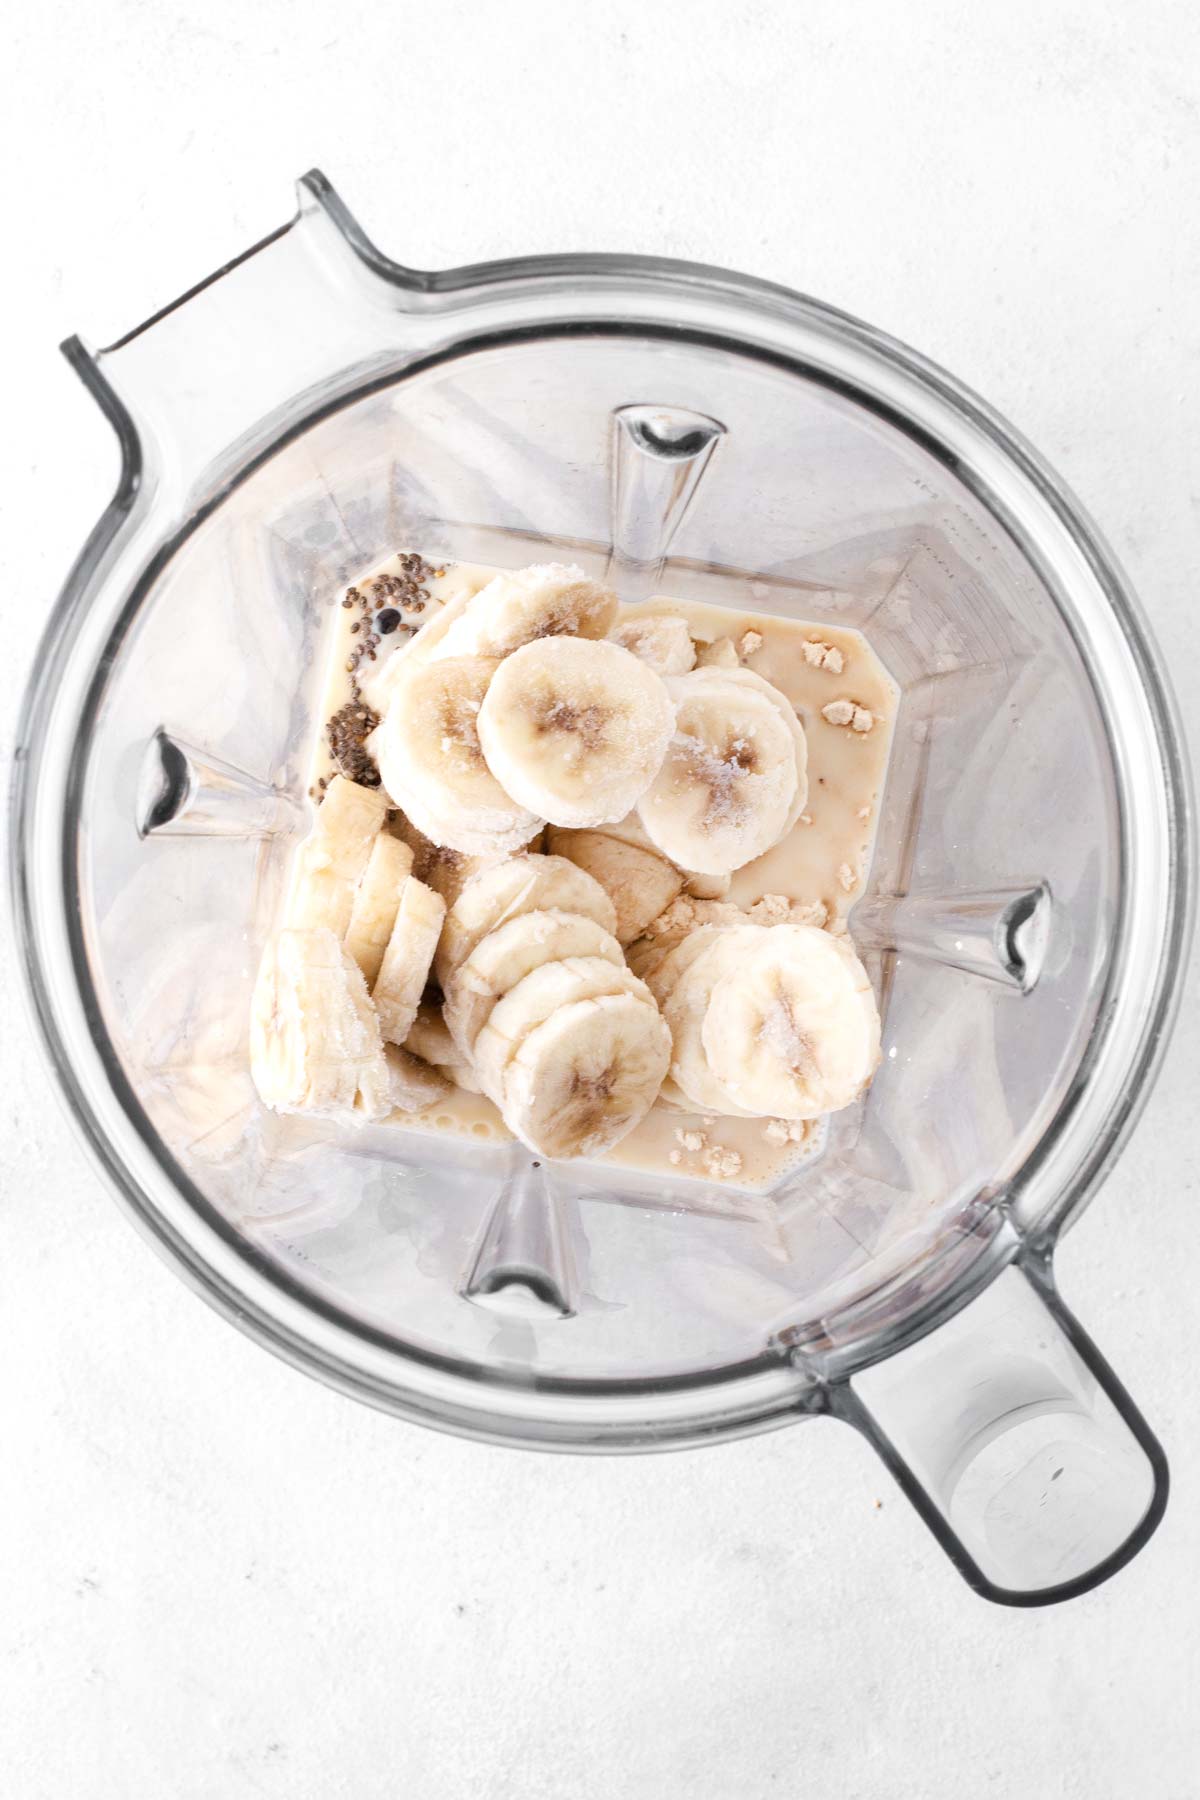 Ingredients for a banana protein smoothie in a blender.